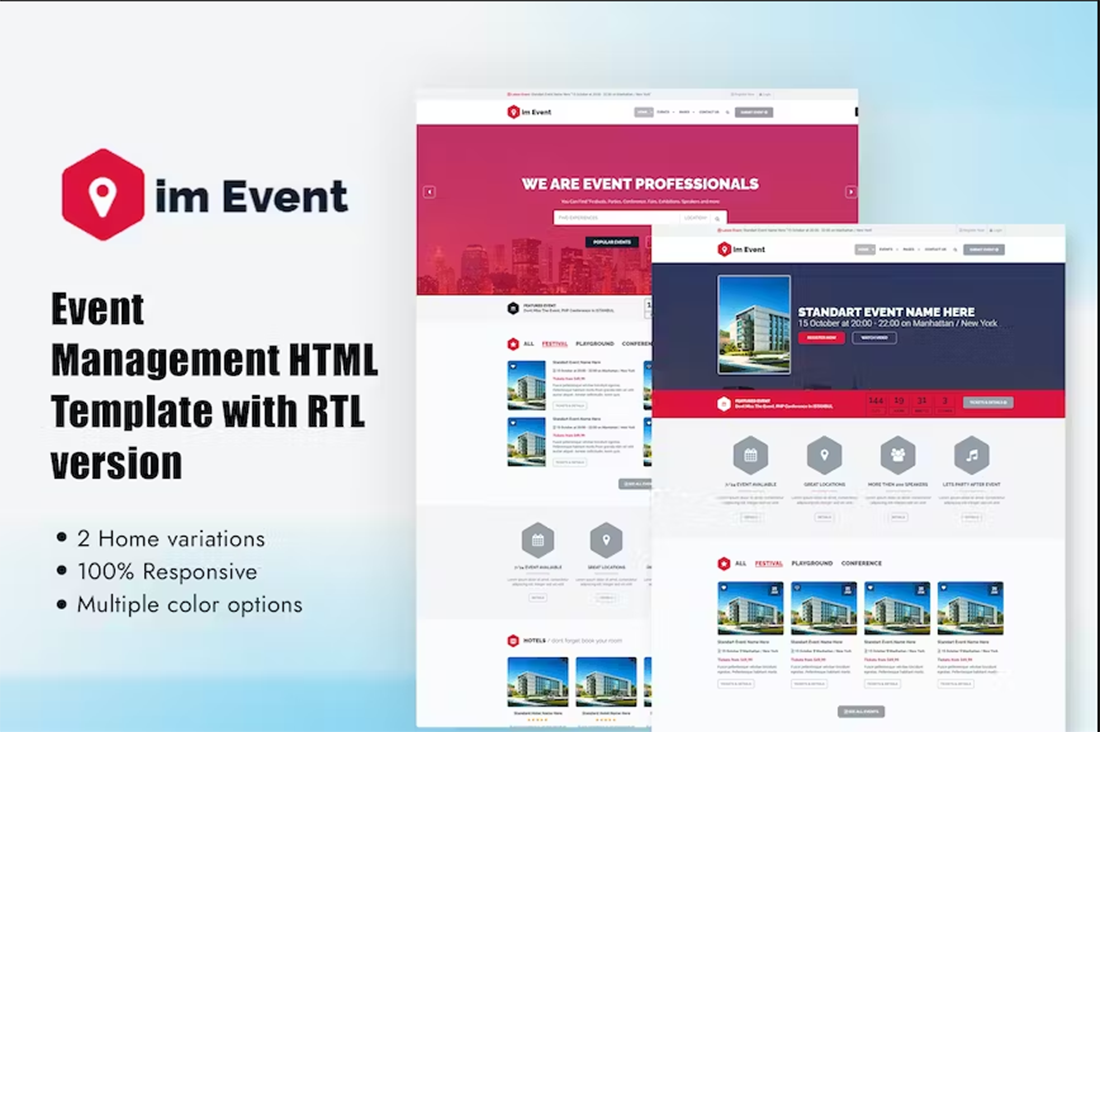 Free Event Management Website Template cover image.